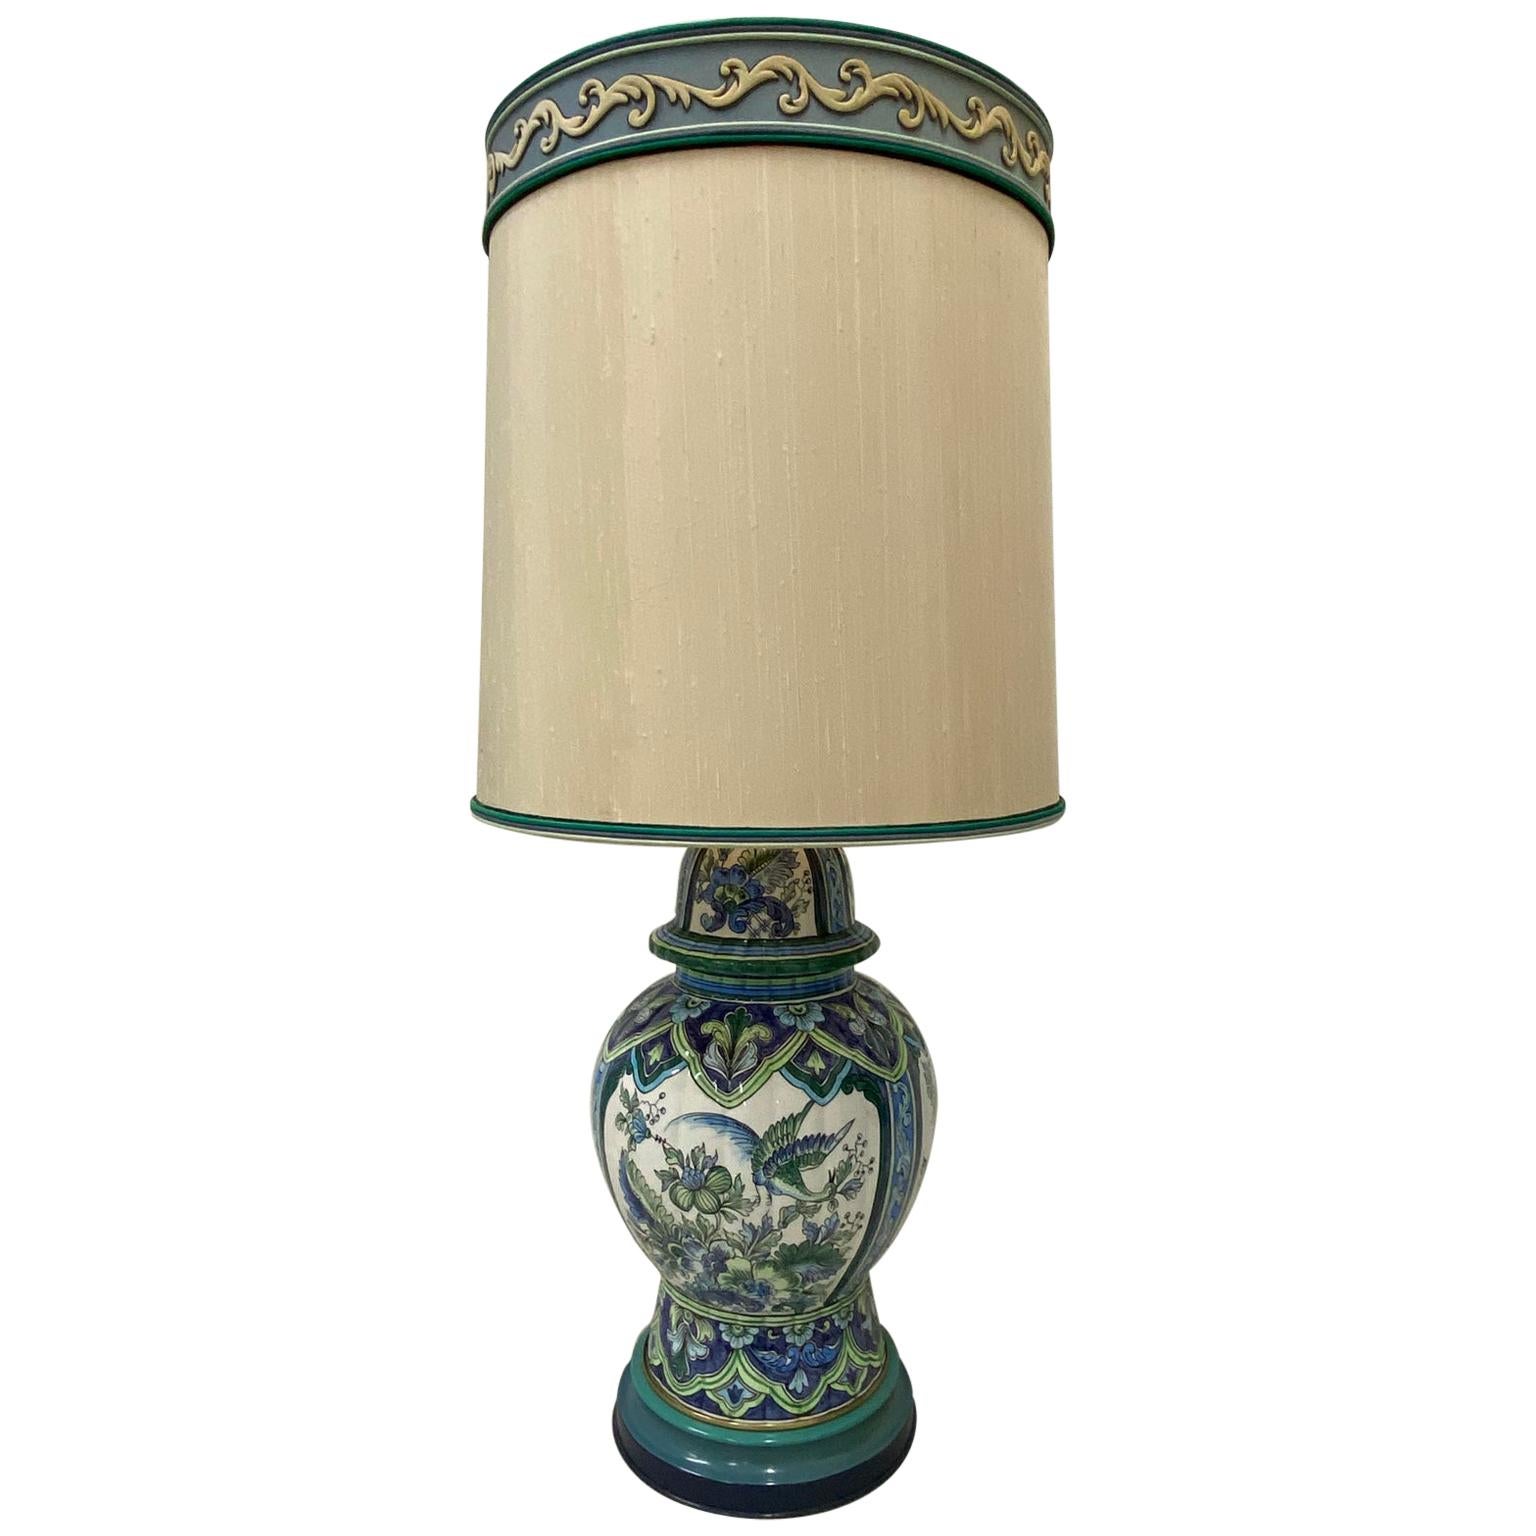 Vintage Hand Painted Ceramic Table Lamp with Original Shade by Marbro